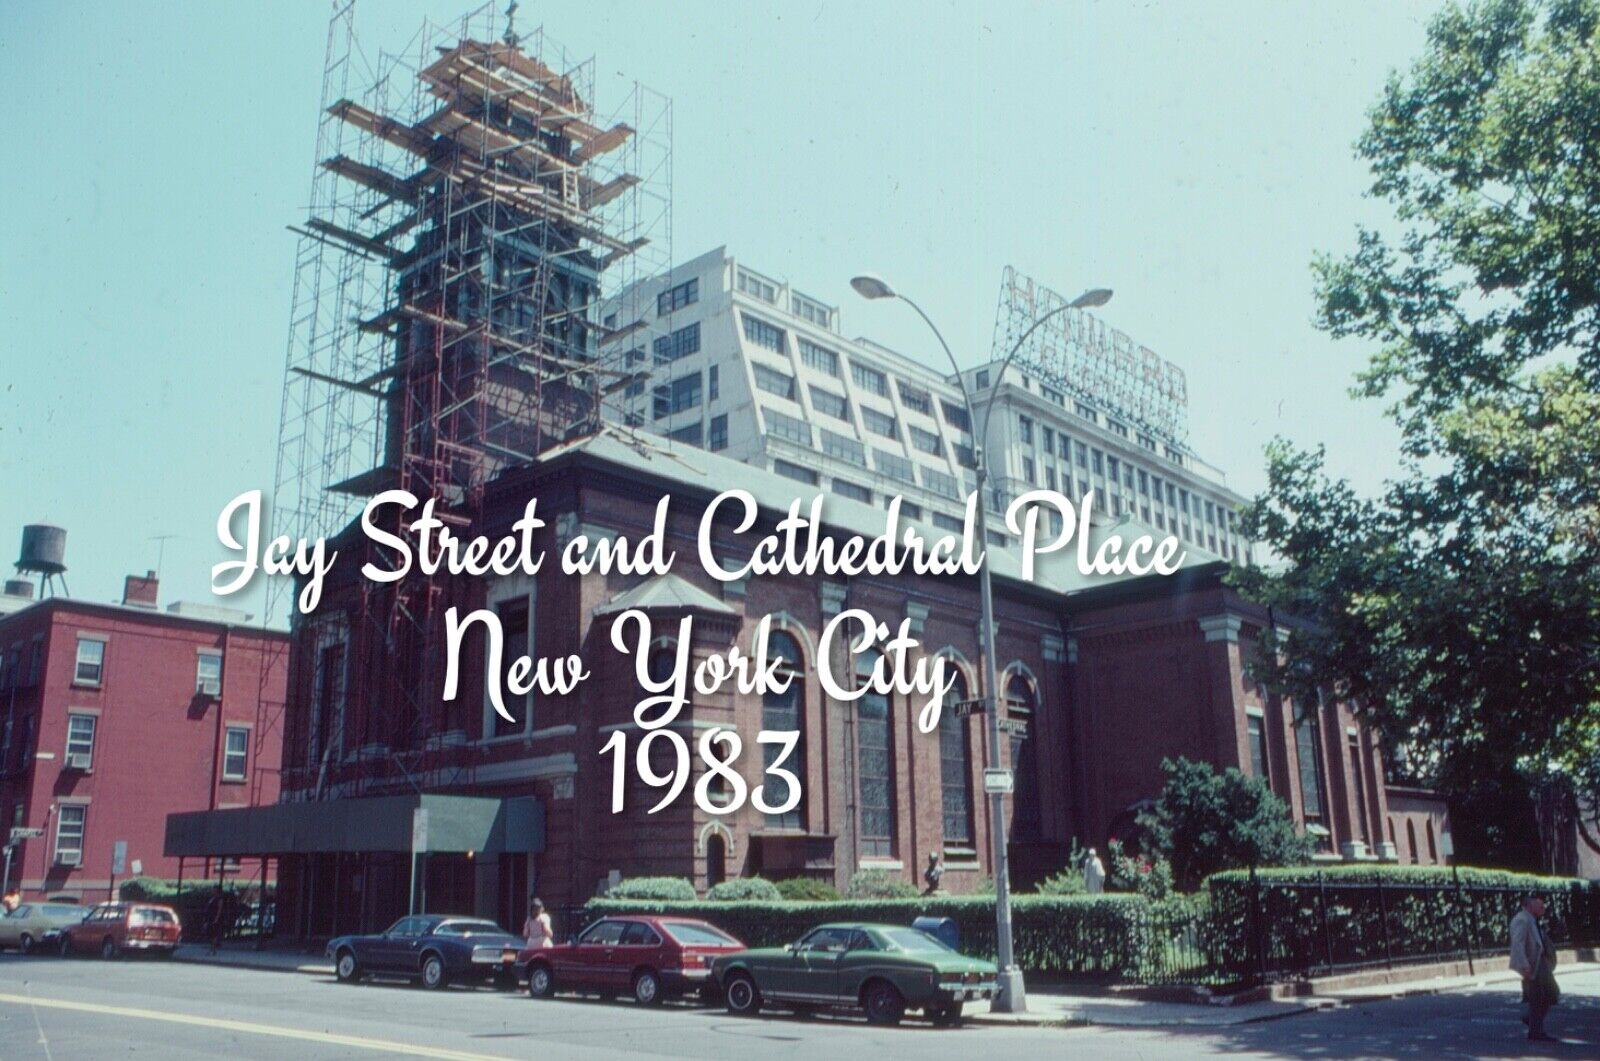 35mm slide Jay Street & Cathedral Place New York City - 1976